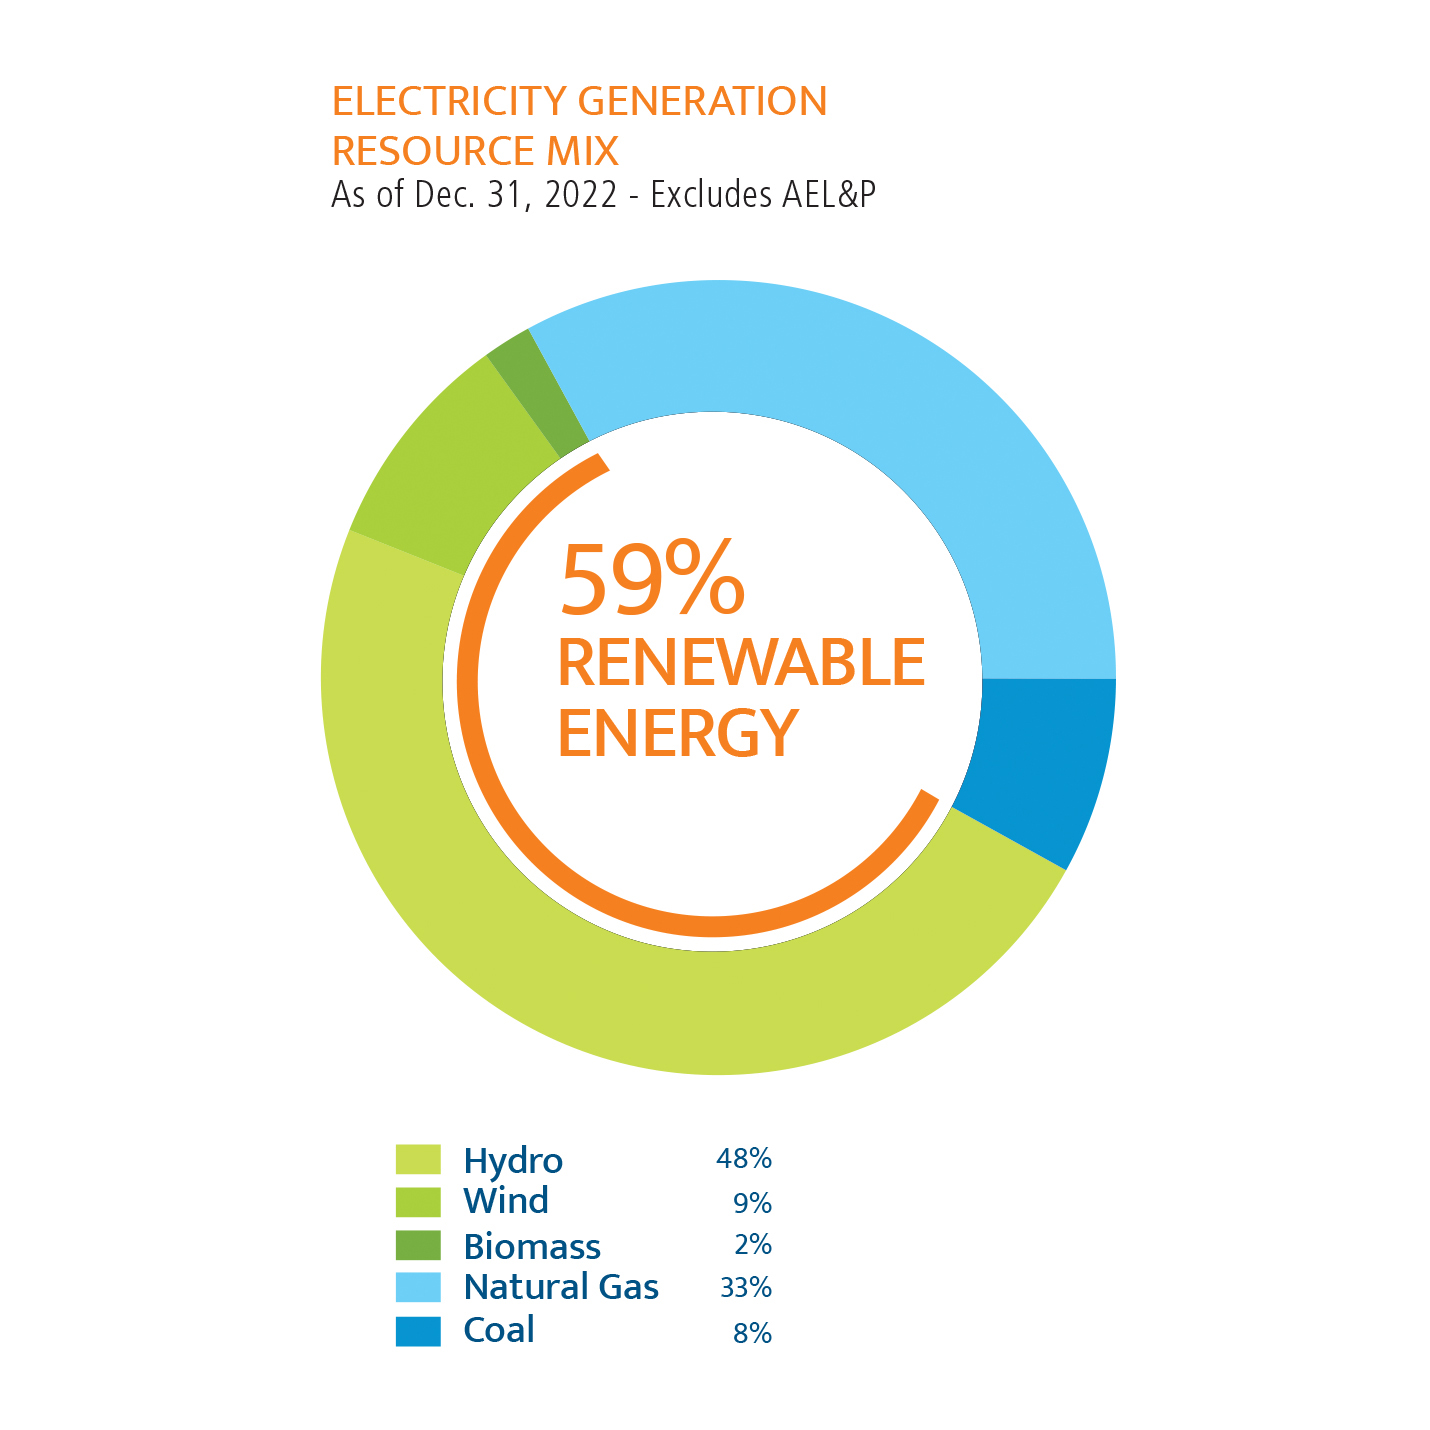 Electricity generation resource mix as of December 31, 2022 (excludes AEL&P) - 59% renewable energy, 48% hydro, 9% wind, 2% biomass, 33% natural gas, 8% coal